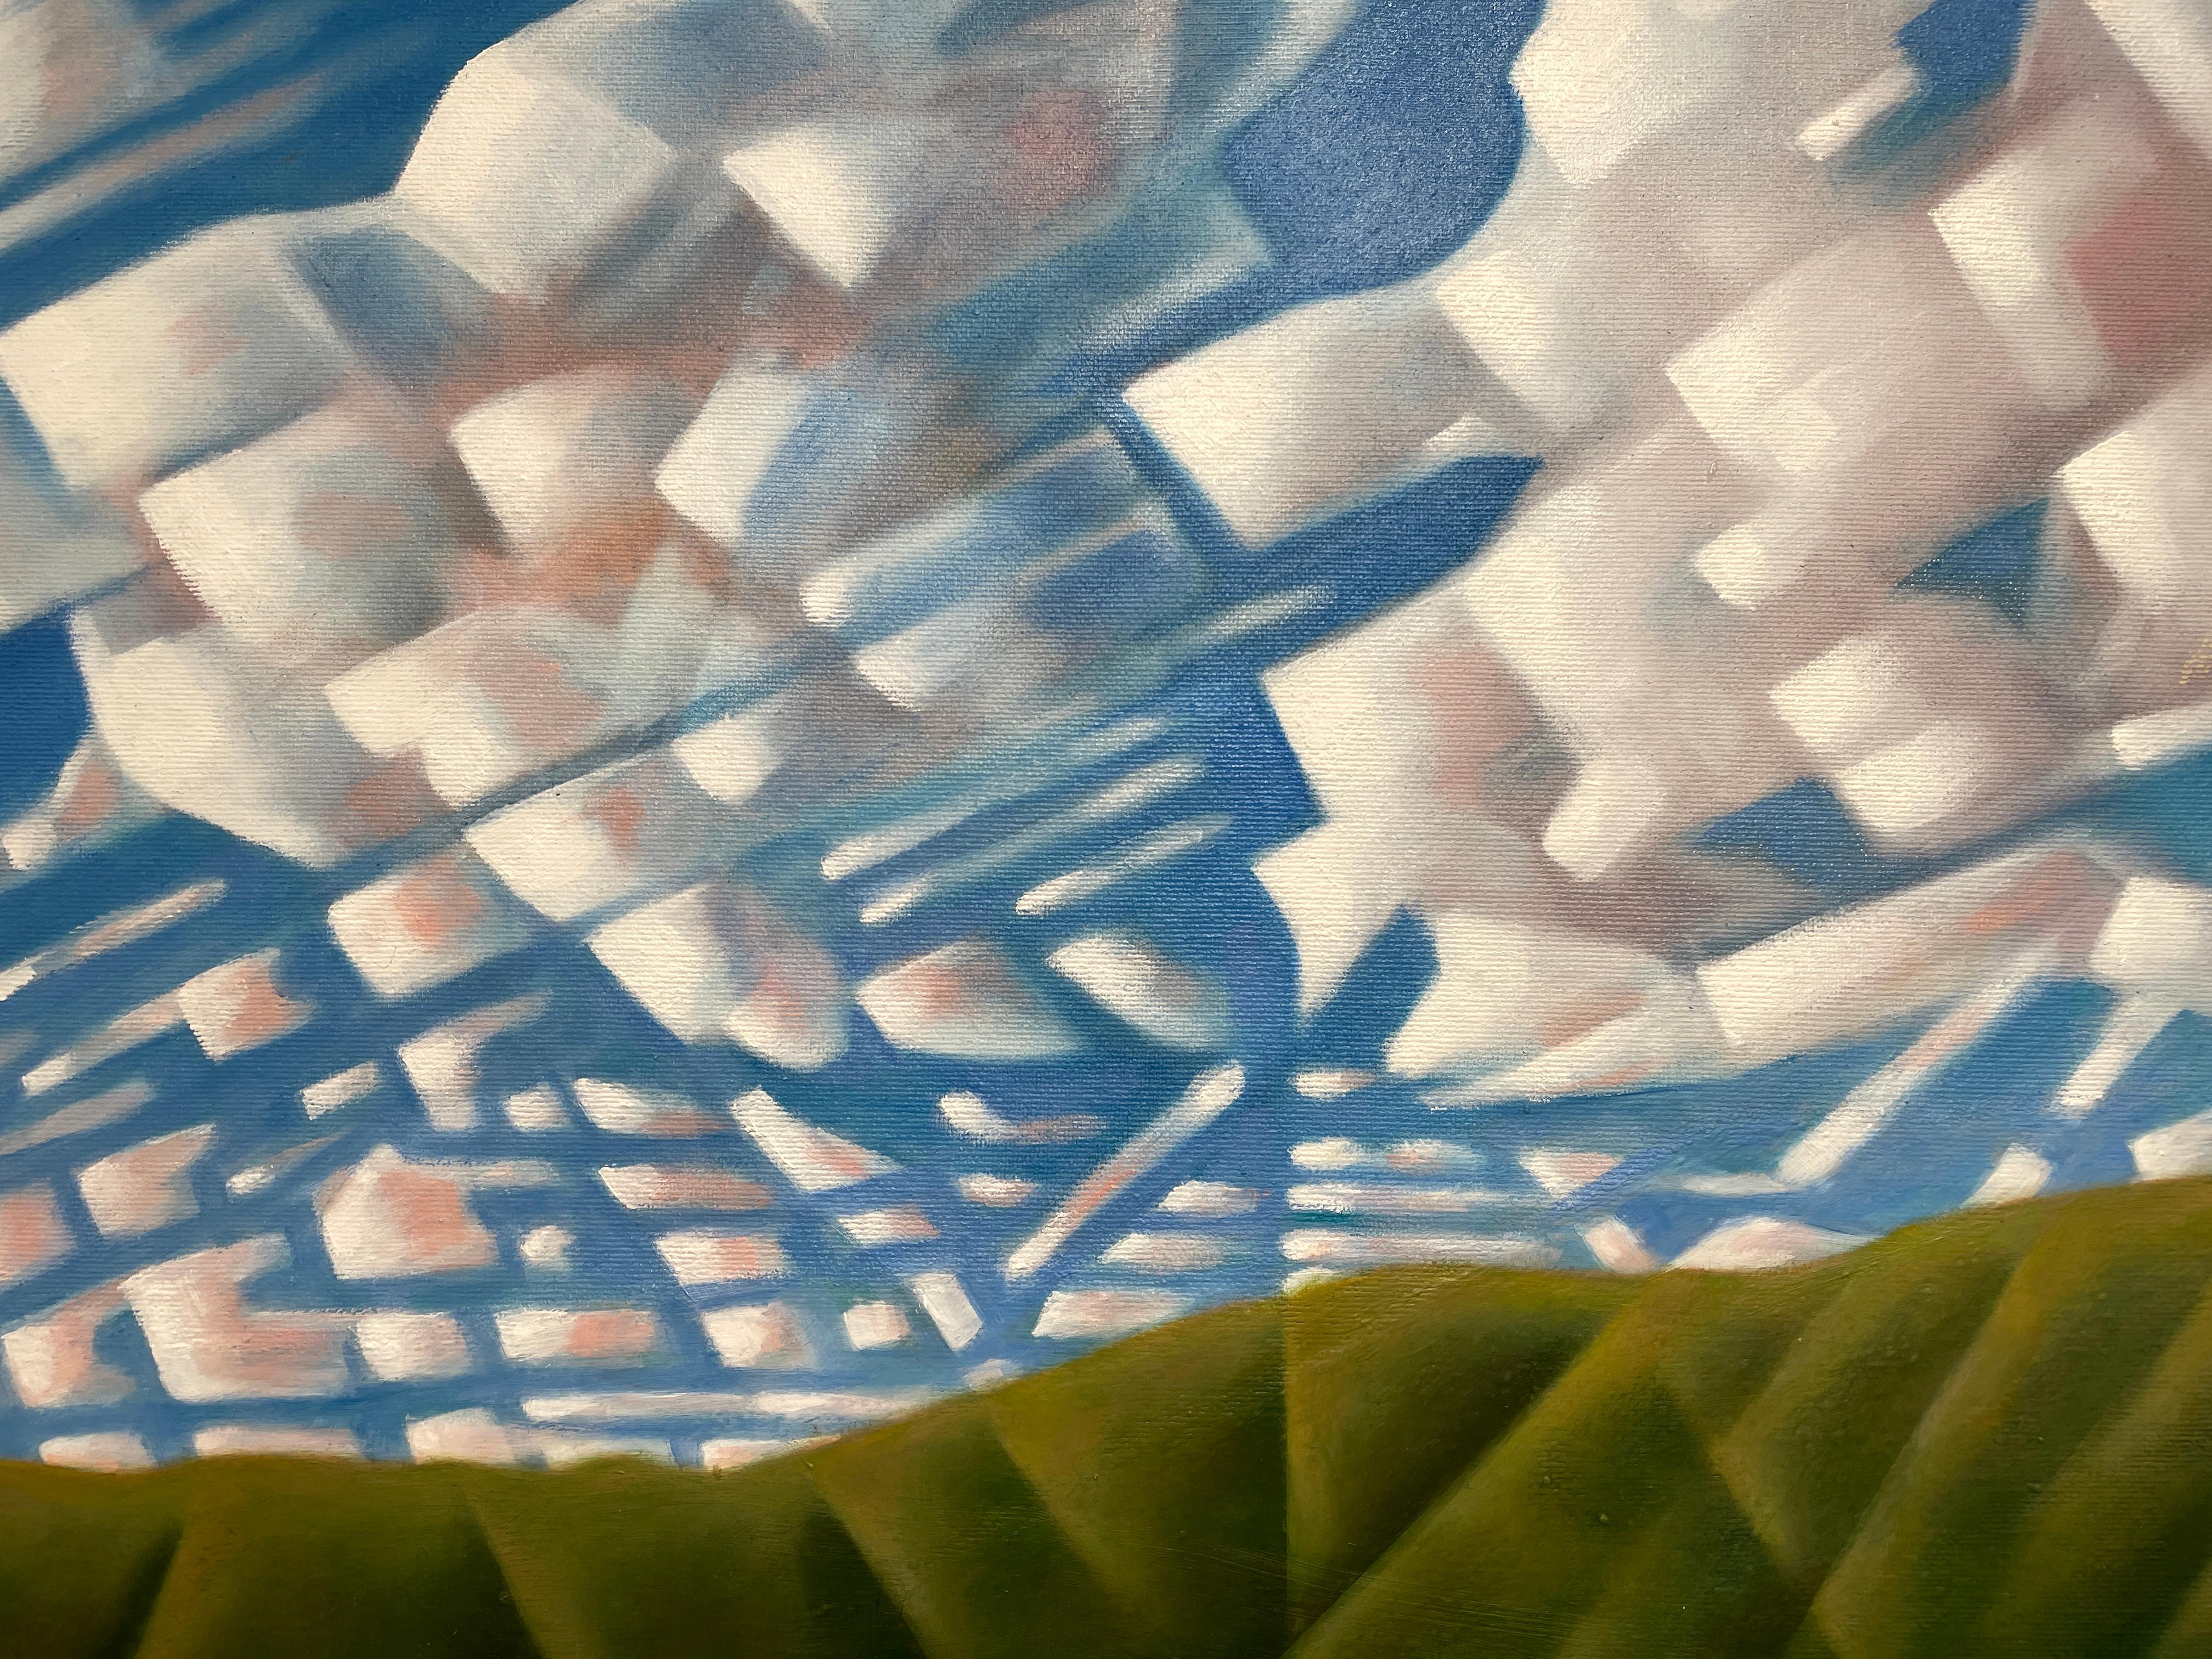 'Clouds and Canyons' - Serene Natural World - Geometric Abstract Landscape - Abstract Geometric Painting by Robert Glick